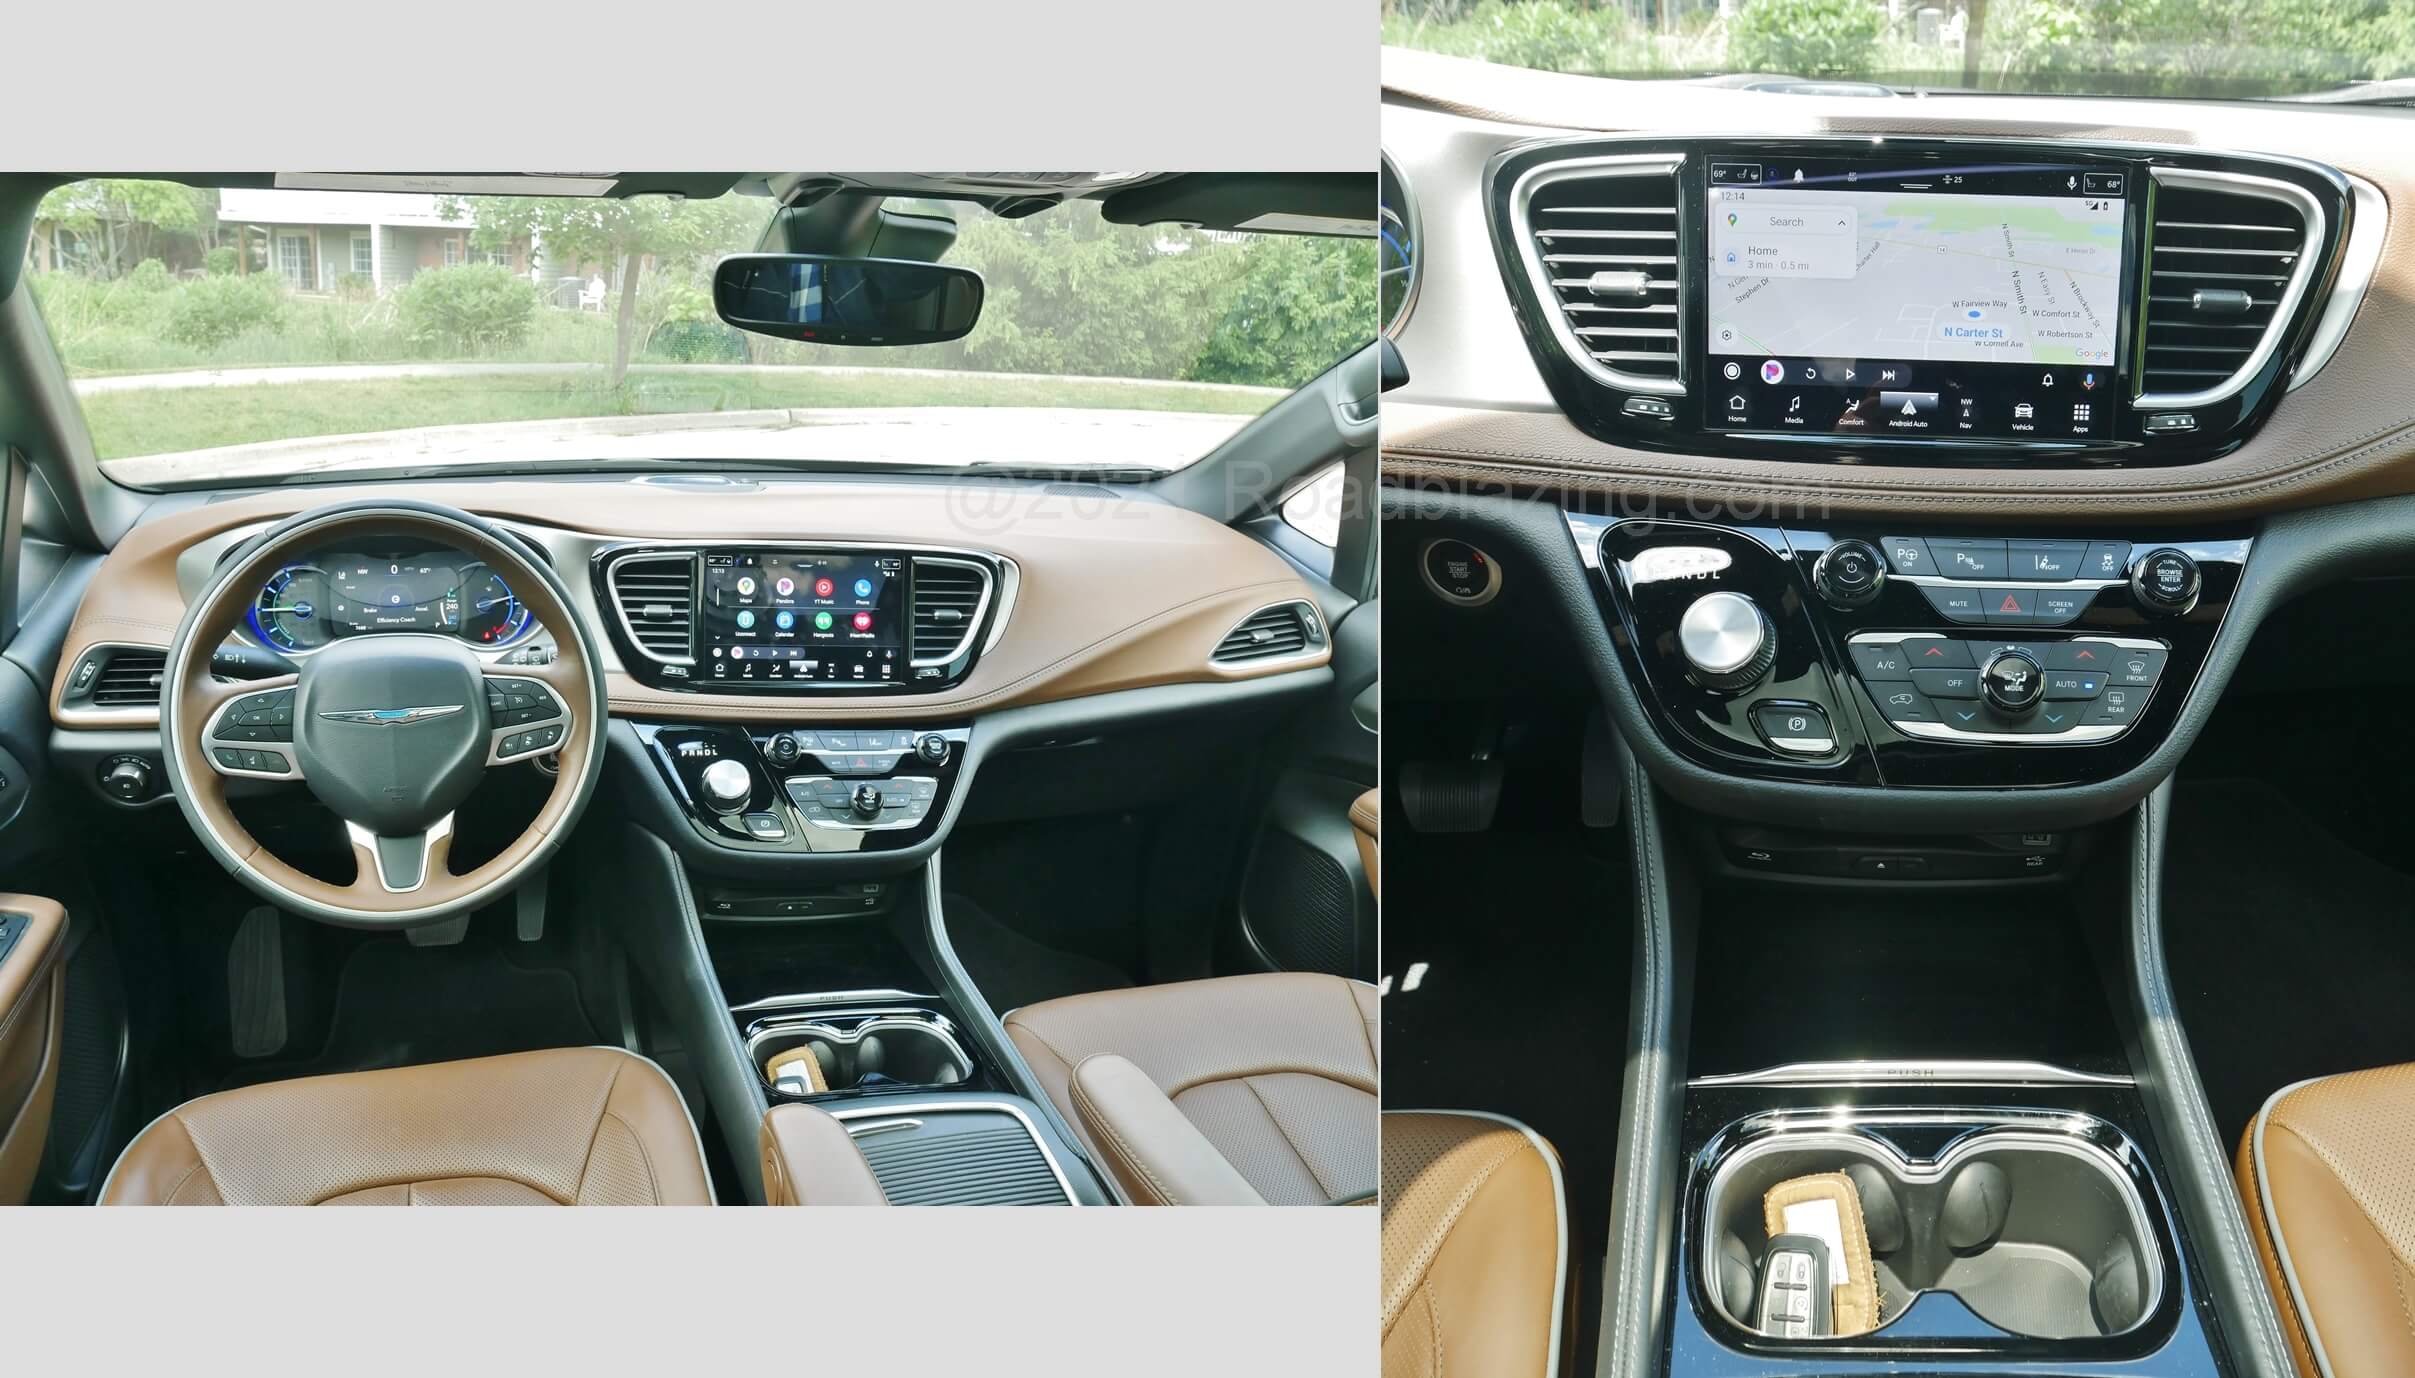 2021 Chrysler Pacifica Limited Hybrid PHEV: Android Auto & Apple CarPlay smart phone projection